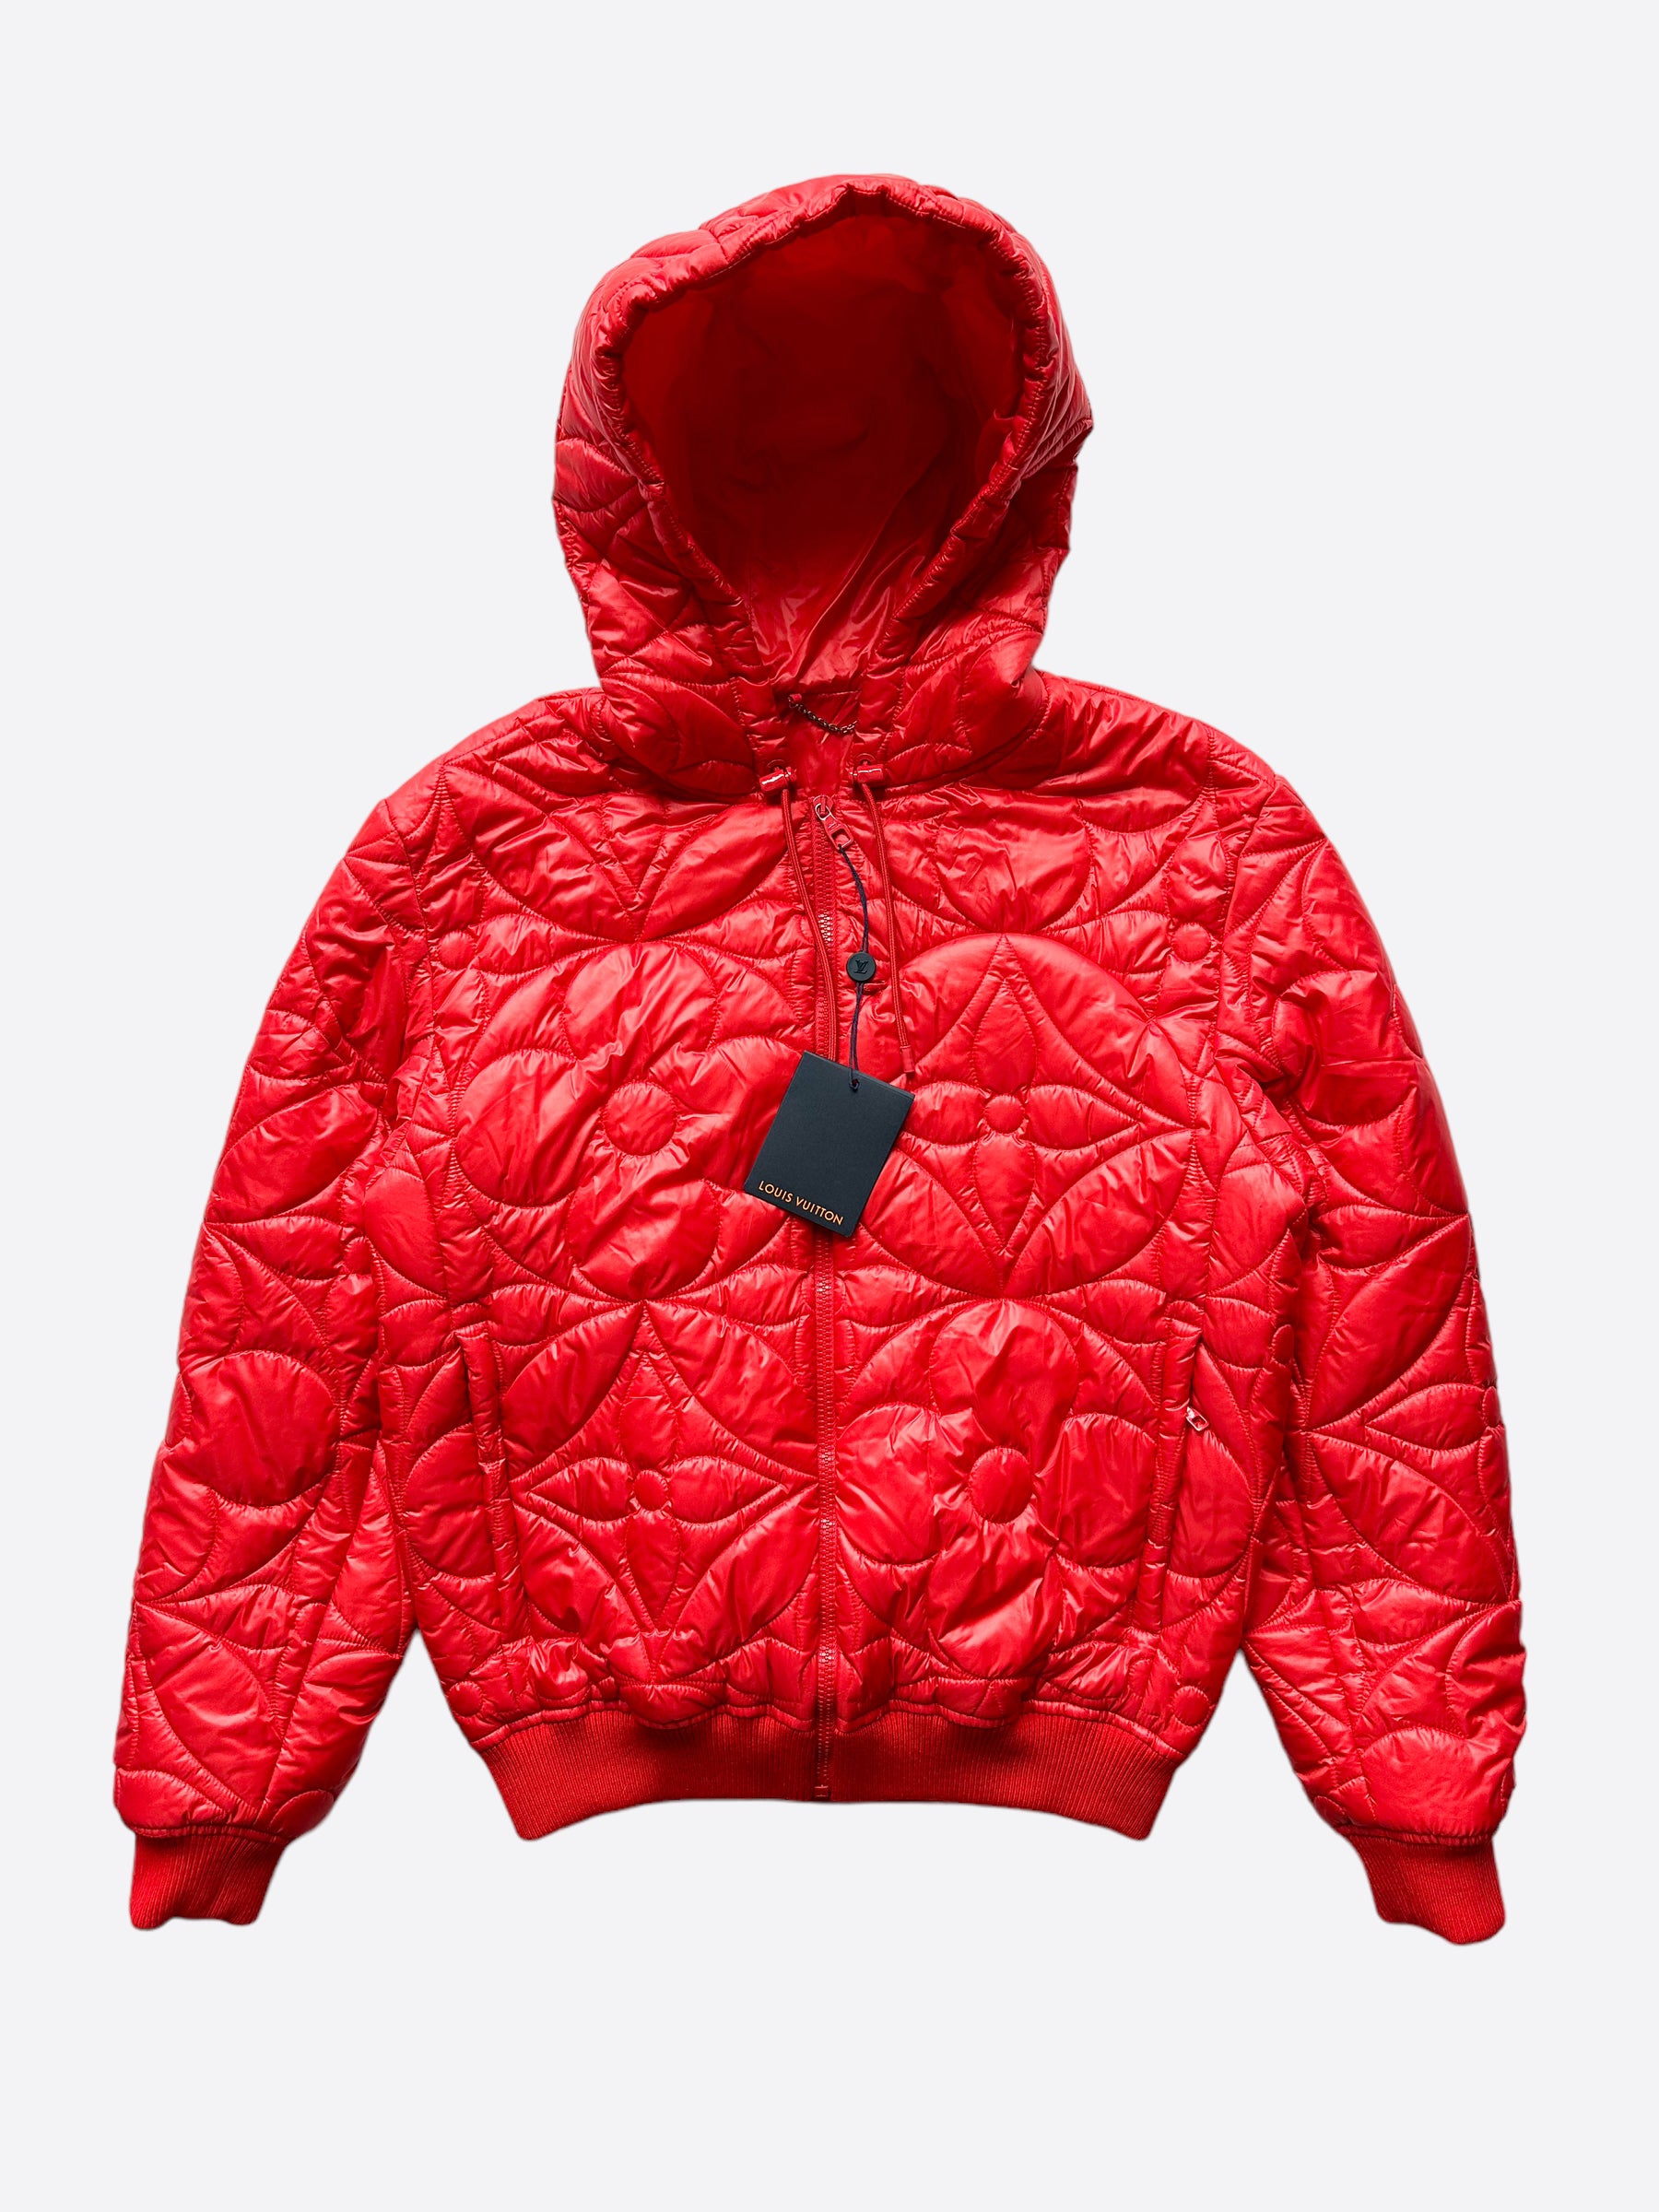 Louis Vuitton Quilted Zip-Up Hoodie size M